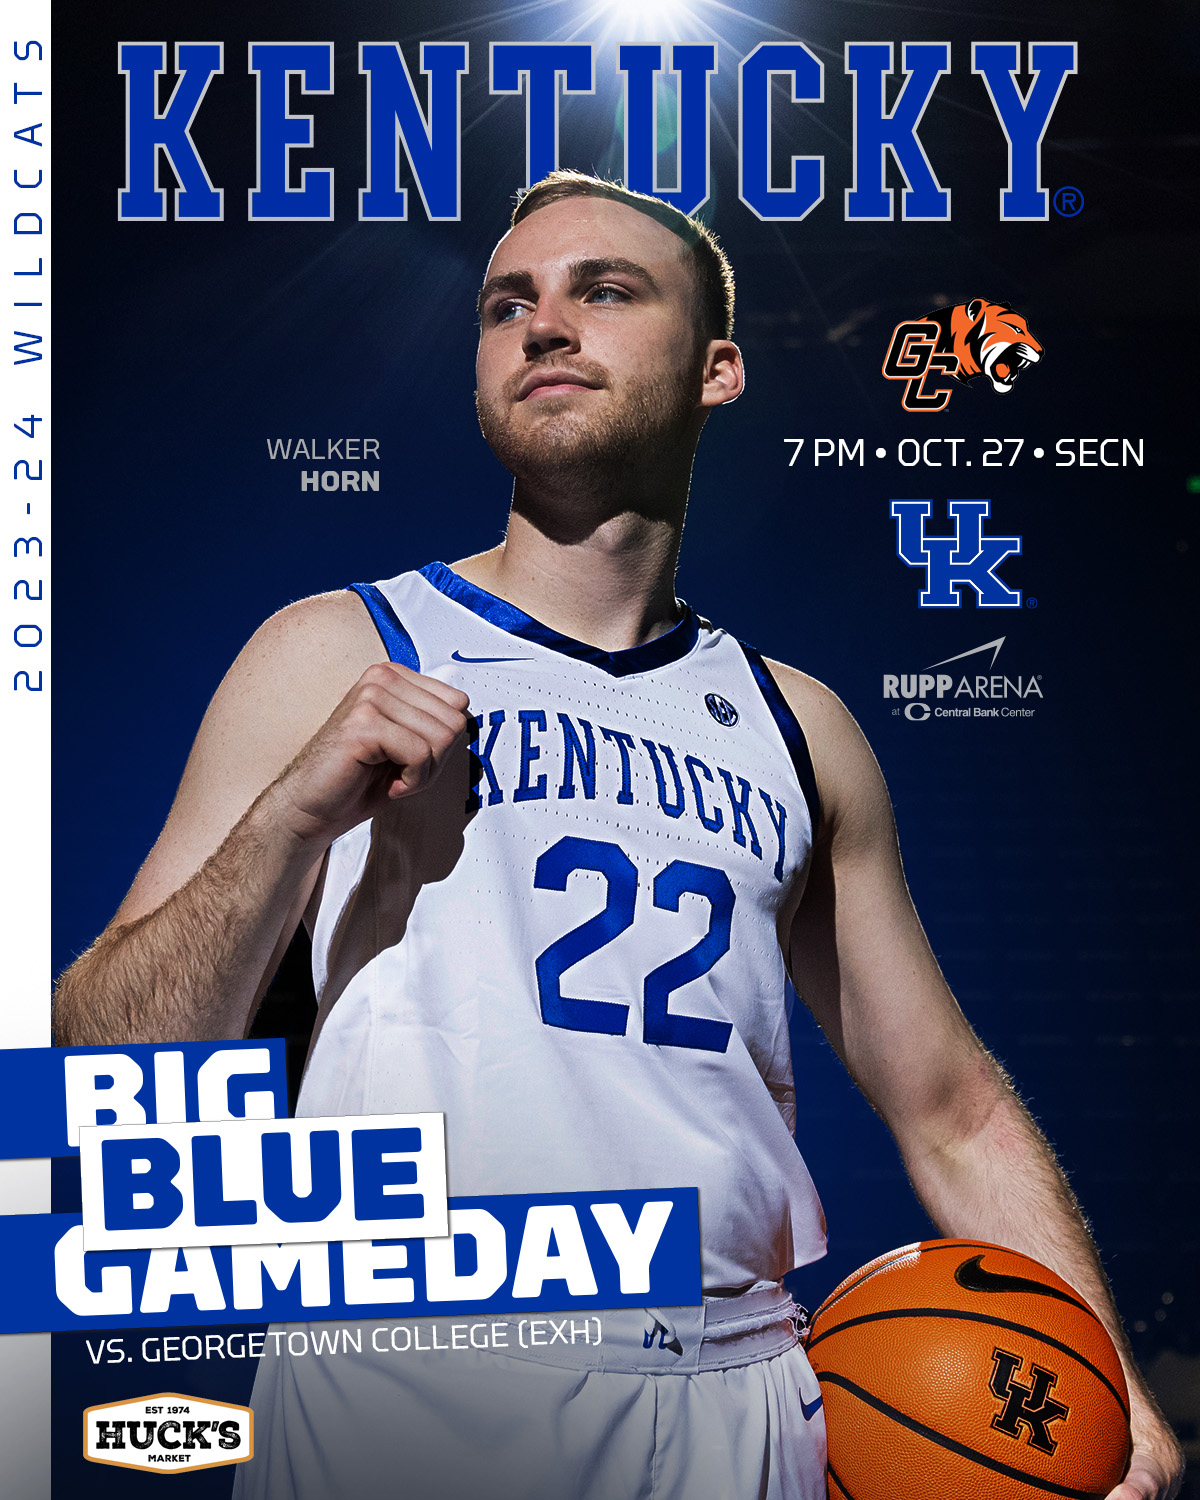 Listen and Watch UK Sports Network Radio Coverage of Kentucky Men's Basketball vs Georgetown (Exhibition)